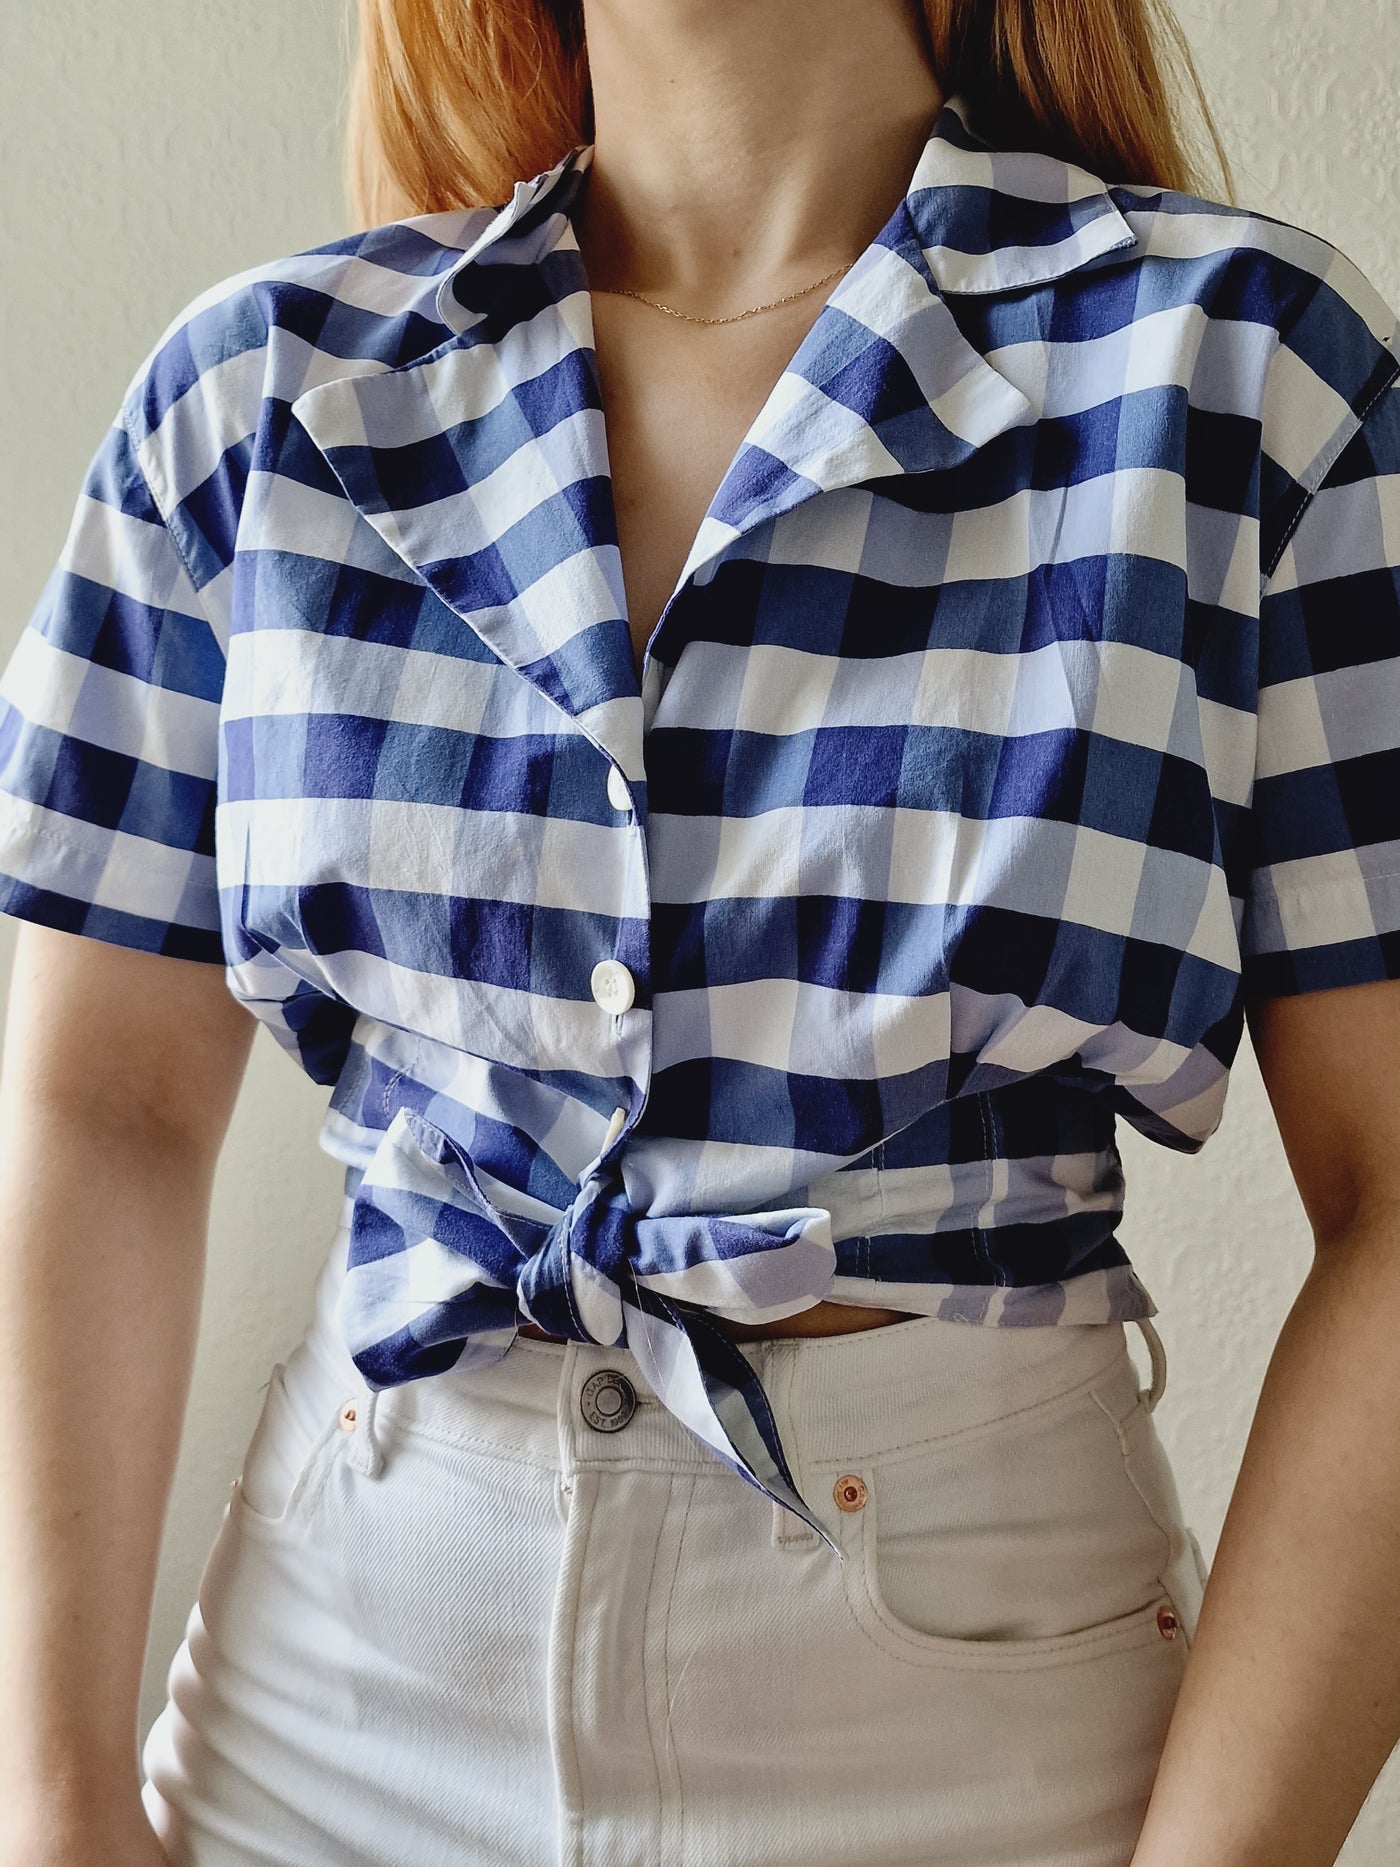 Vintage 90s White & Blue Gingham Cropped Blouse Top - M/L